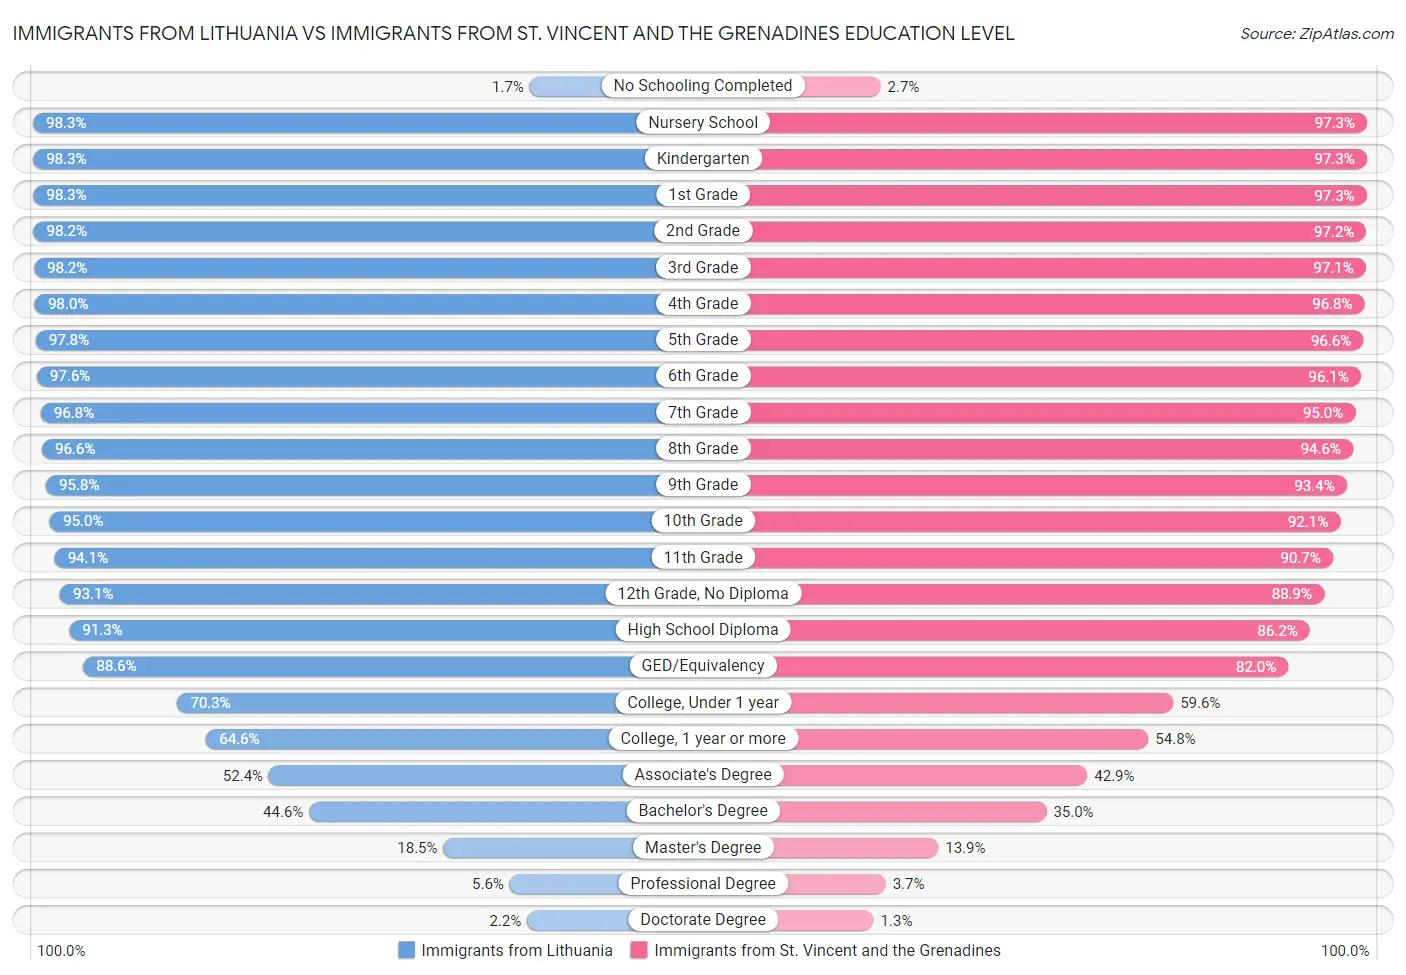 Immigrants from Lithuania vs Immigrants from St. Vincent and the Grenadines Education Level